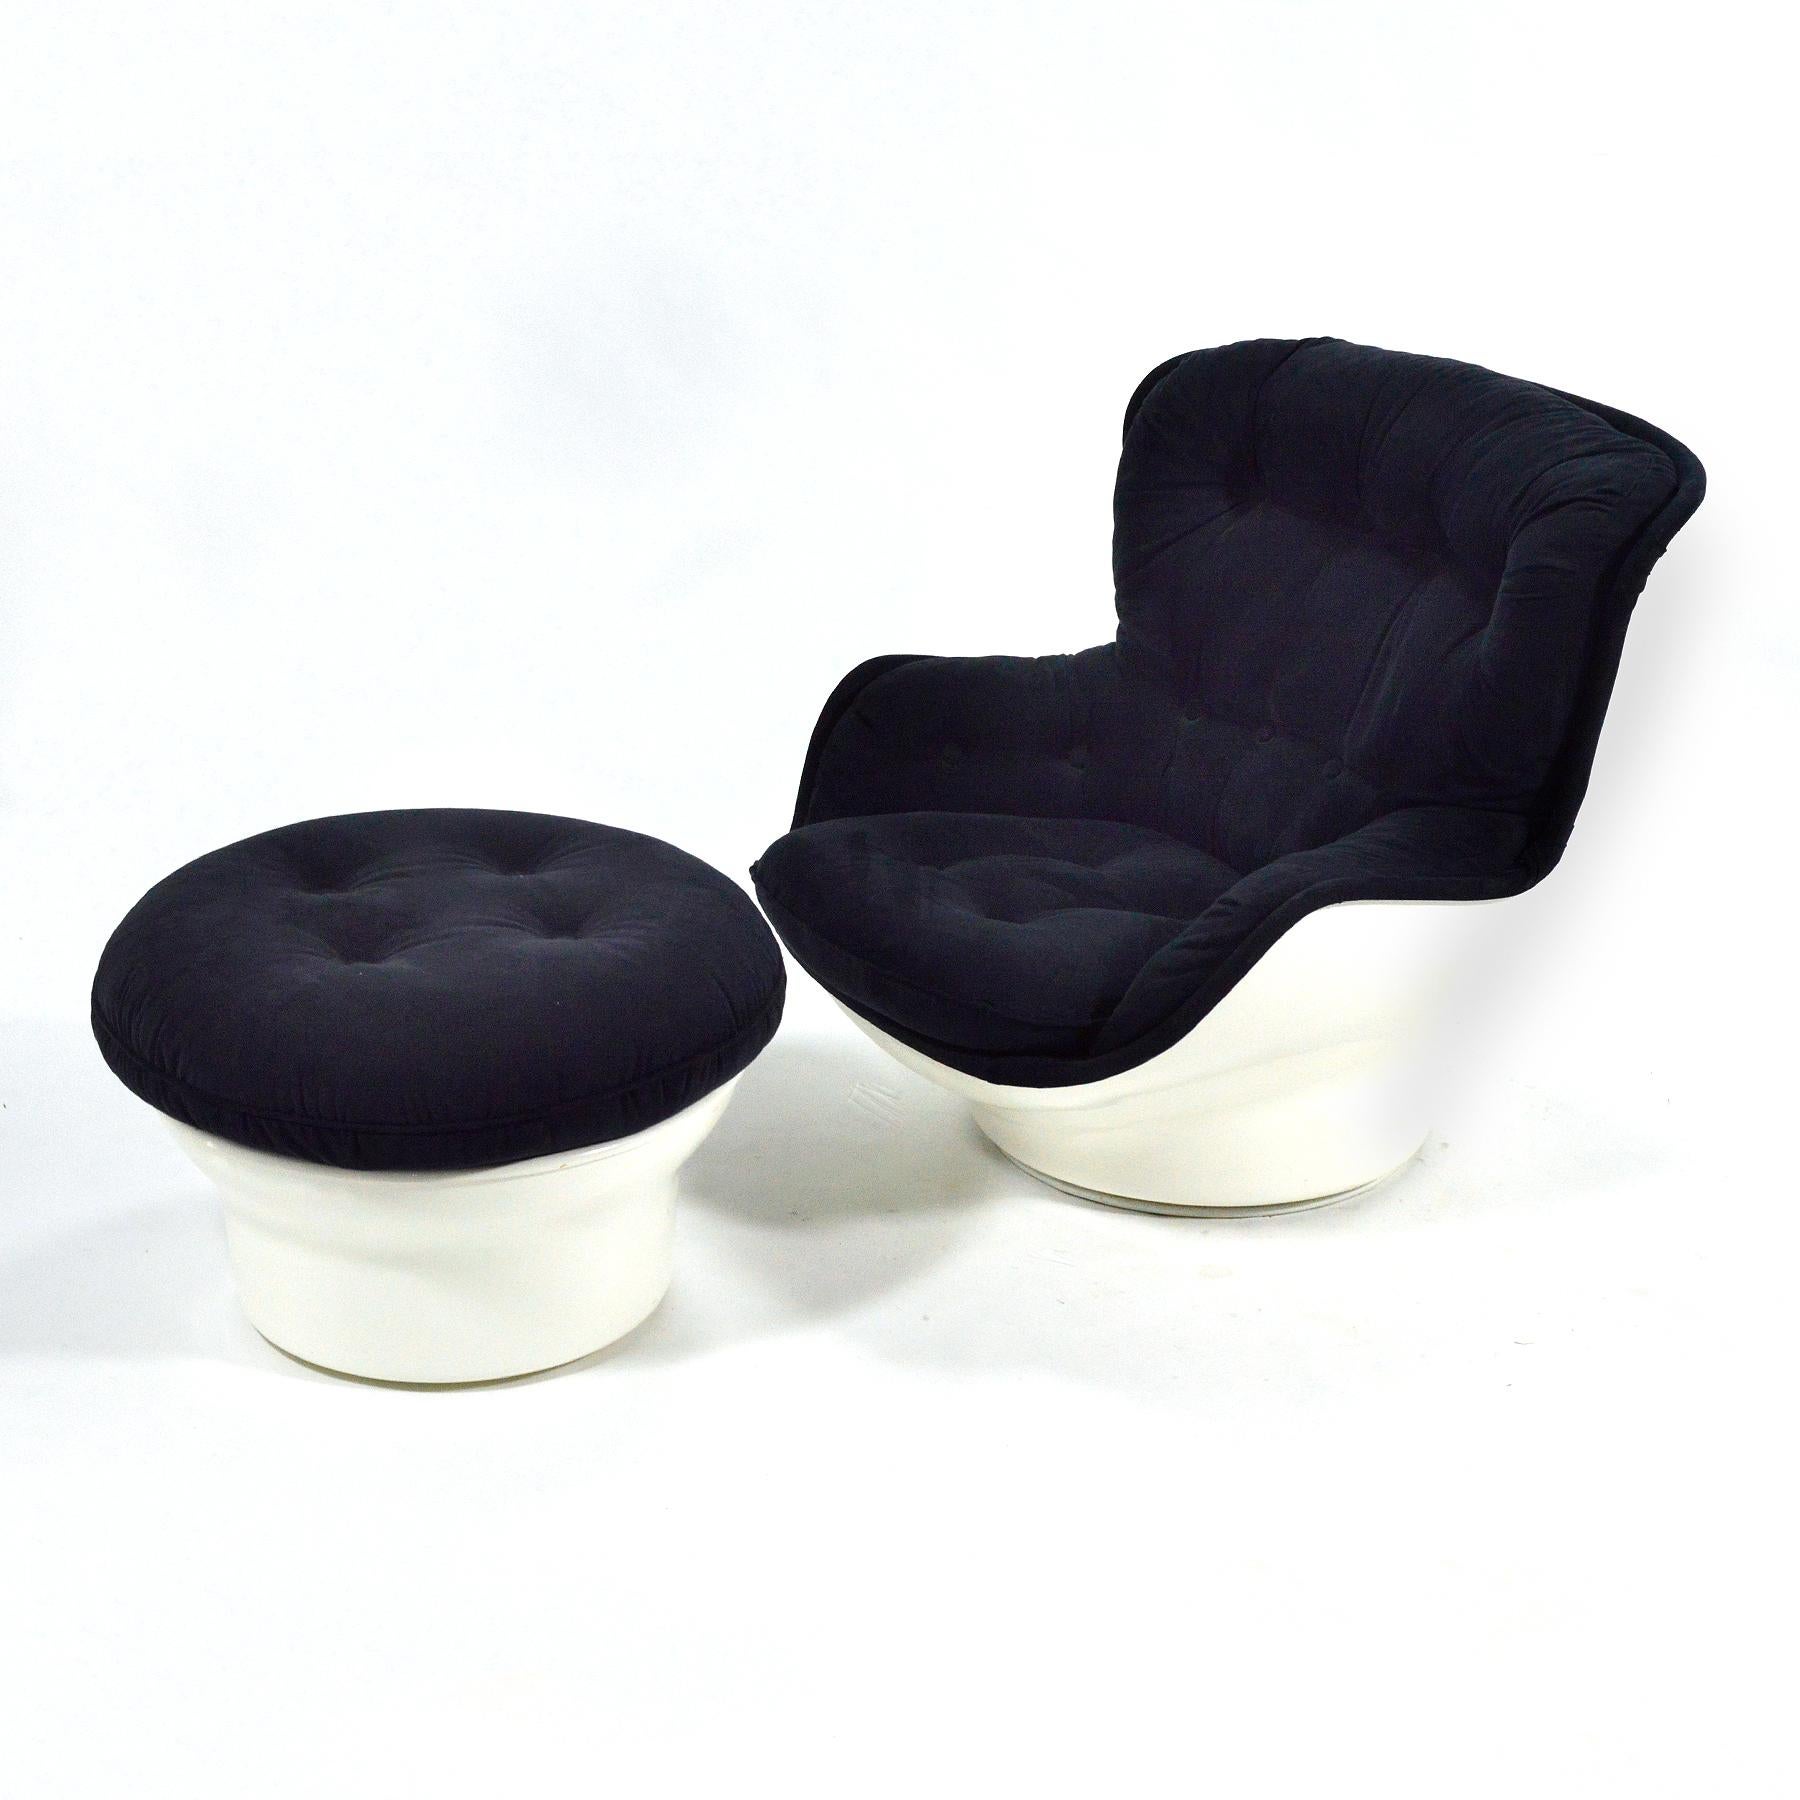 This terrific fiberglass lounge chair by Michel Cadestin for Airborne has a plush, tufted interior set within a white fiberglass body with a swivel base. Sculptural and comfortable, it is in good original condition and it comes complete with the